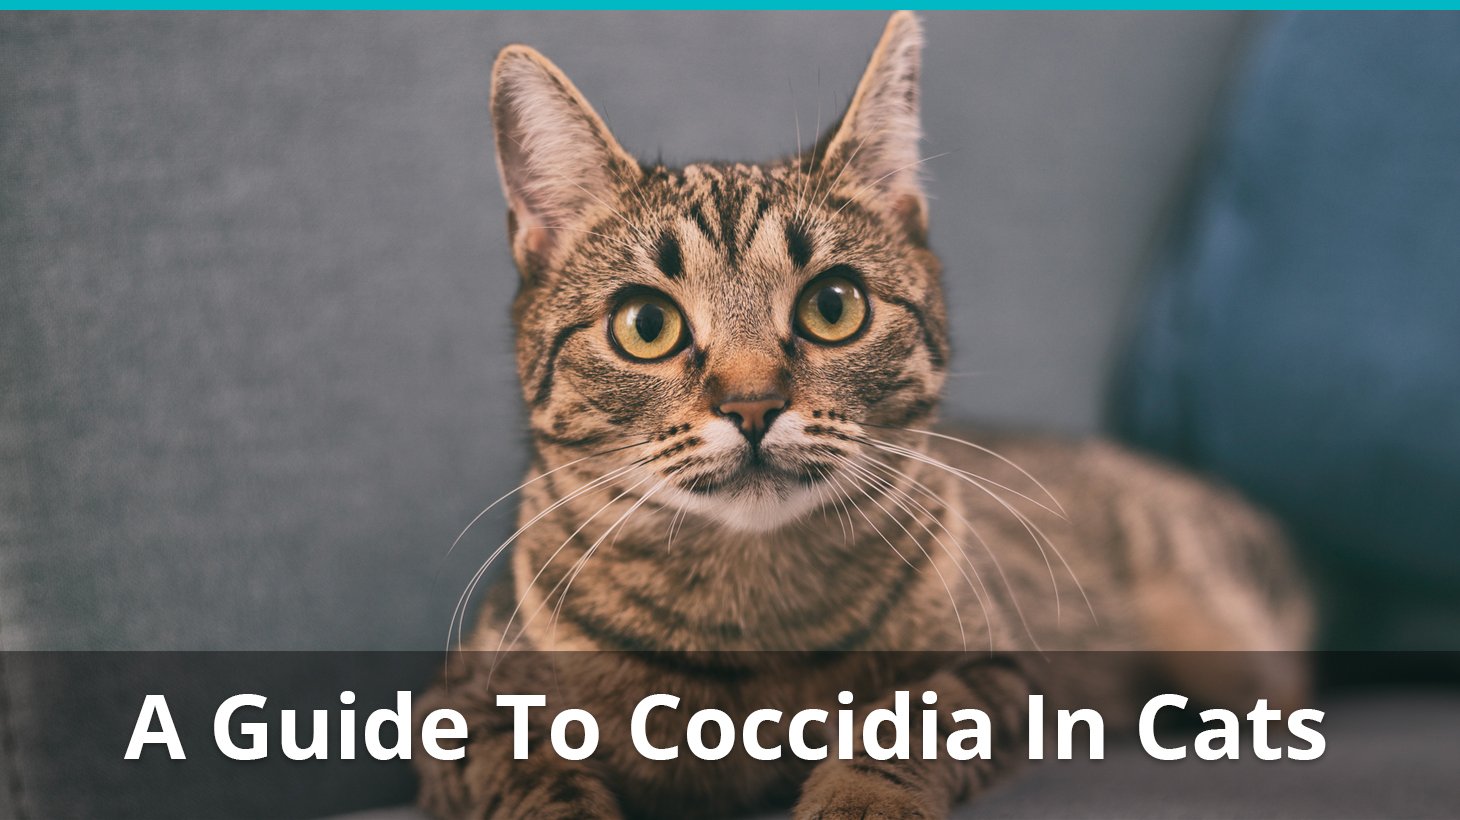 Coccidia In Cats And Kittens: What Is It, Symptoms, Treatments, And More